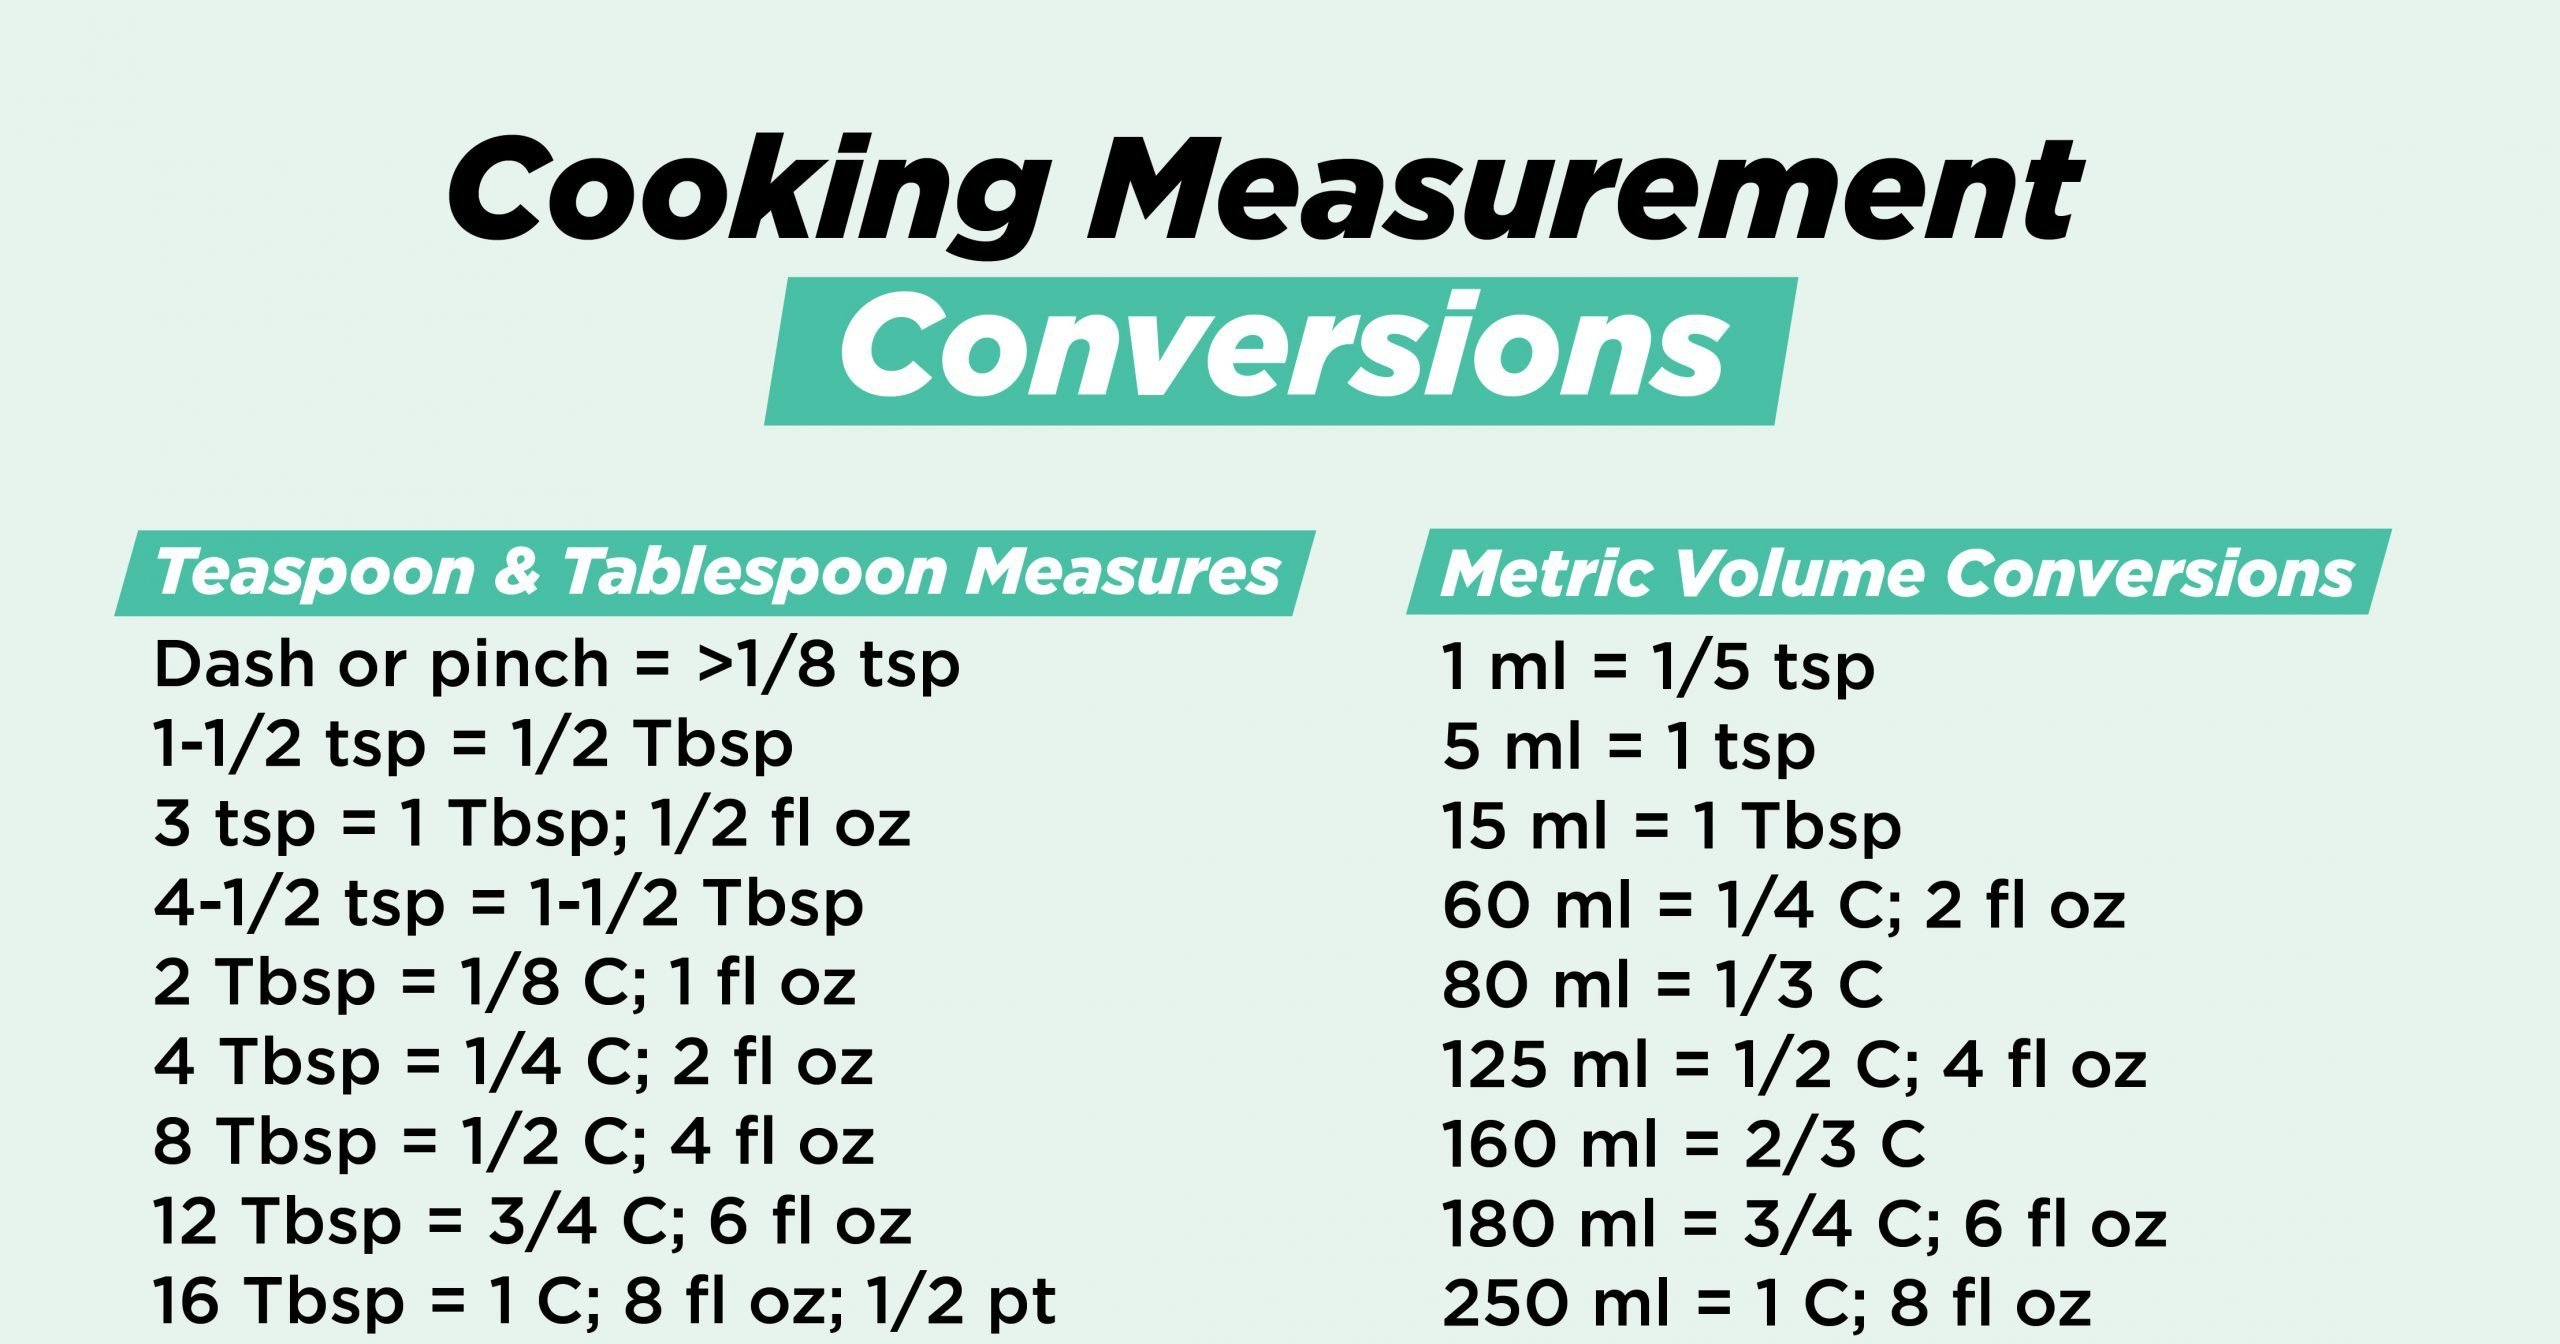 Cooking Measurement Conversions Chart Graphic S Crop Copy Scaled 